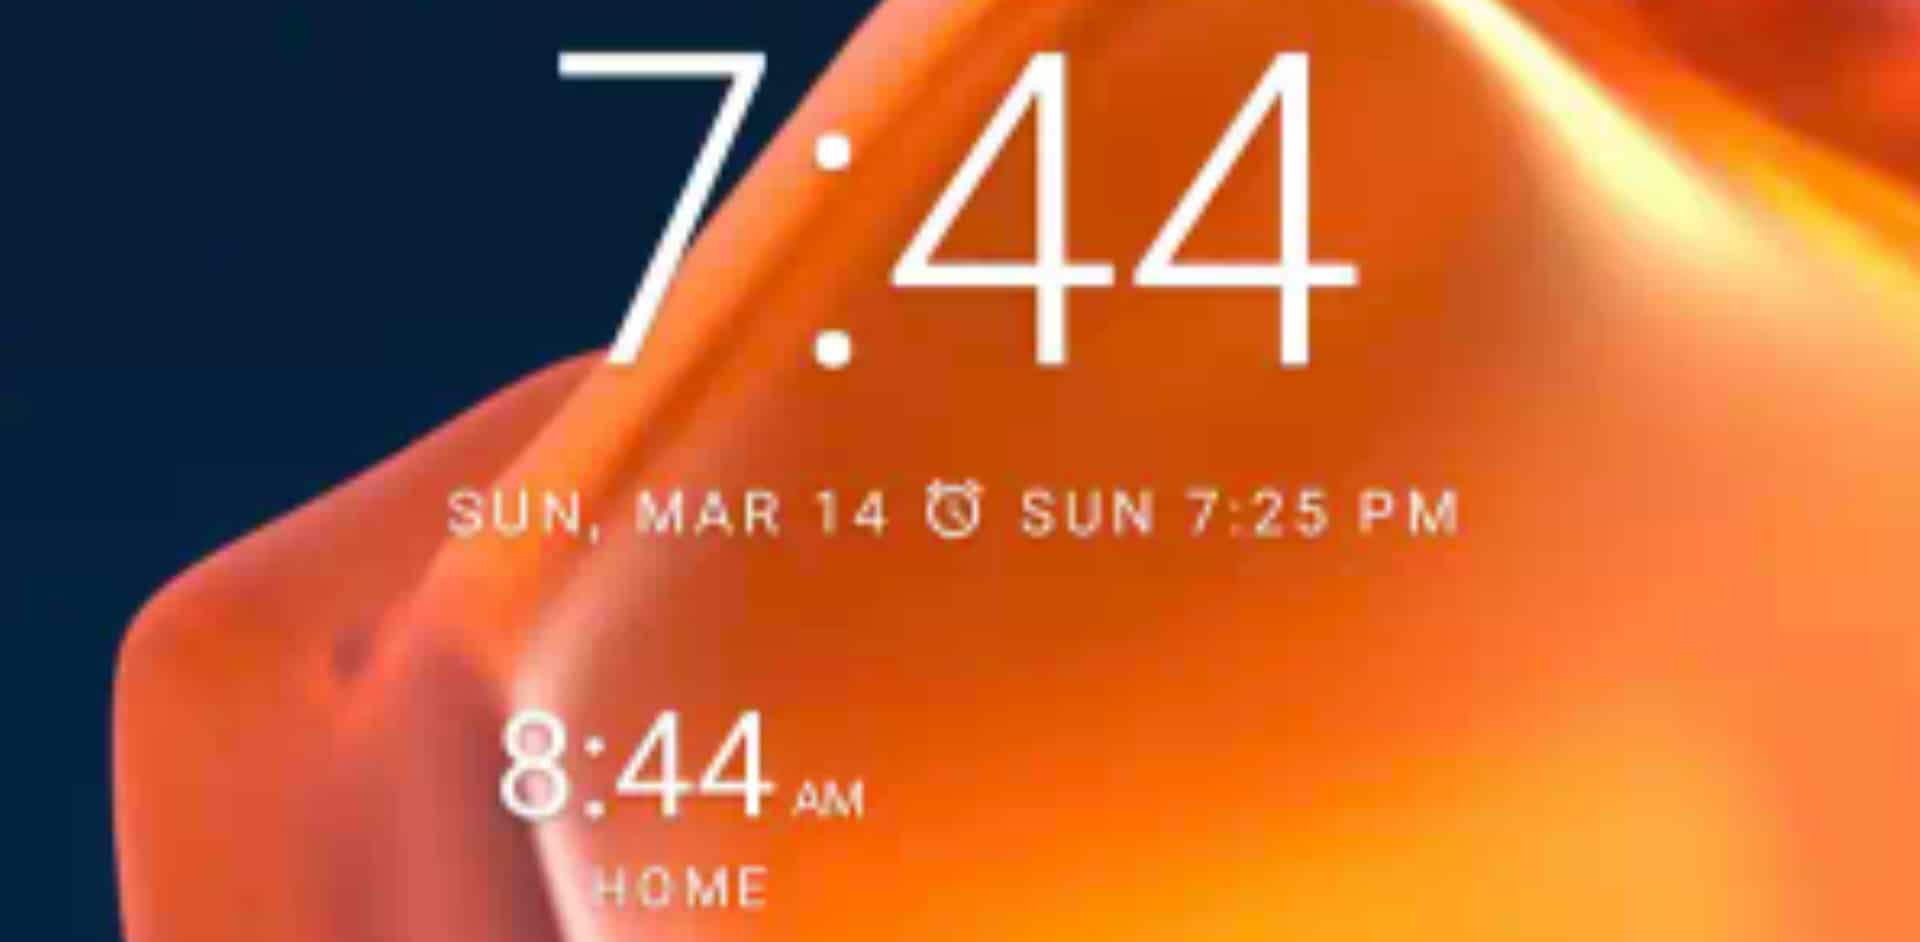 Some Google Pixel Phones Reportedly Hit By Daylight Saving Time Update Bug